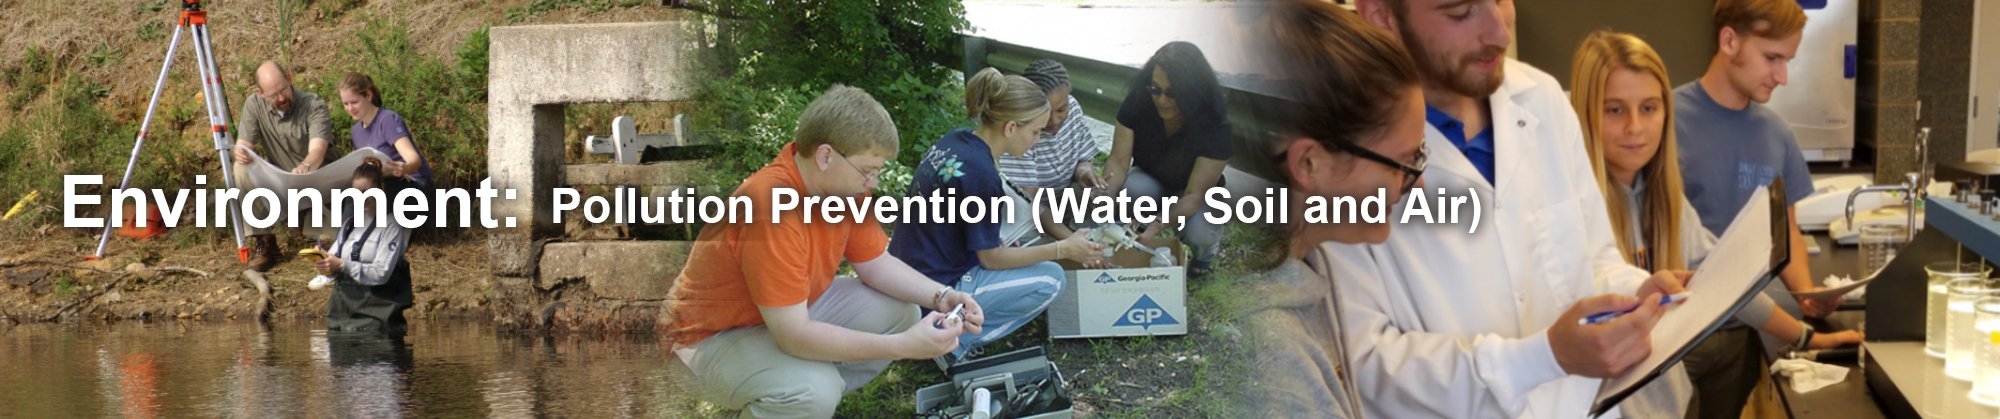 Environment: Pollution Prevention (Water, Soil and Air)